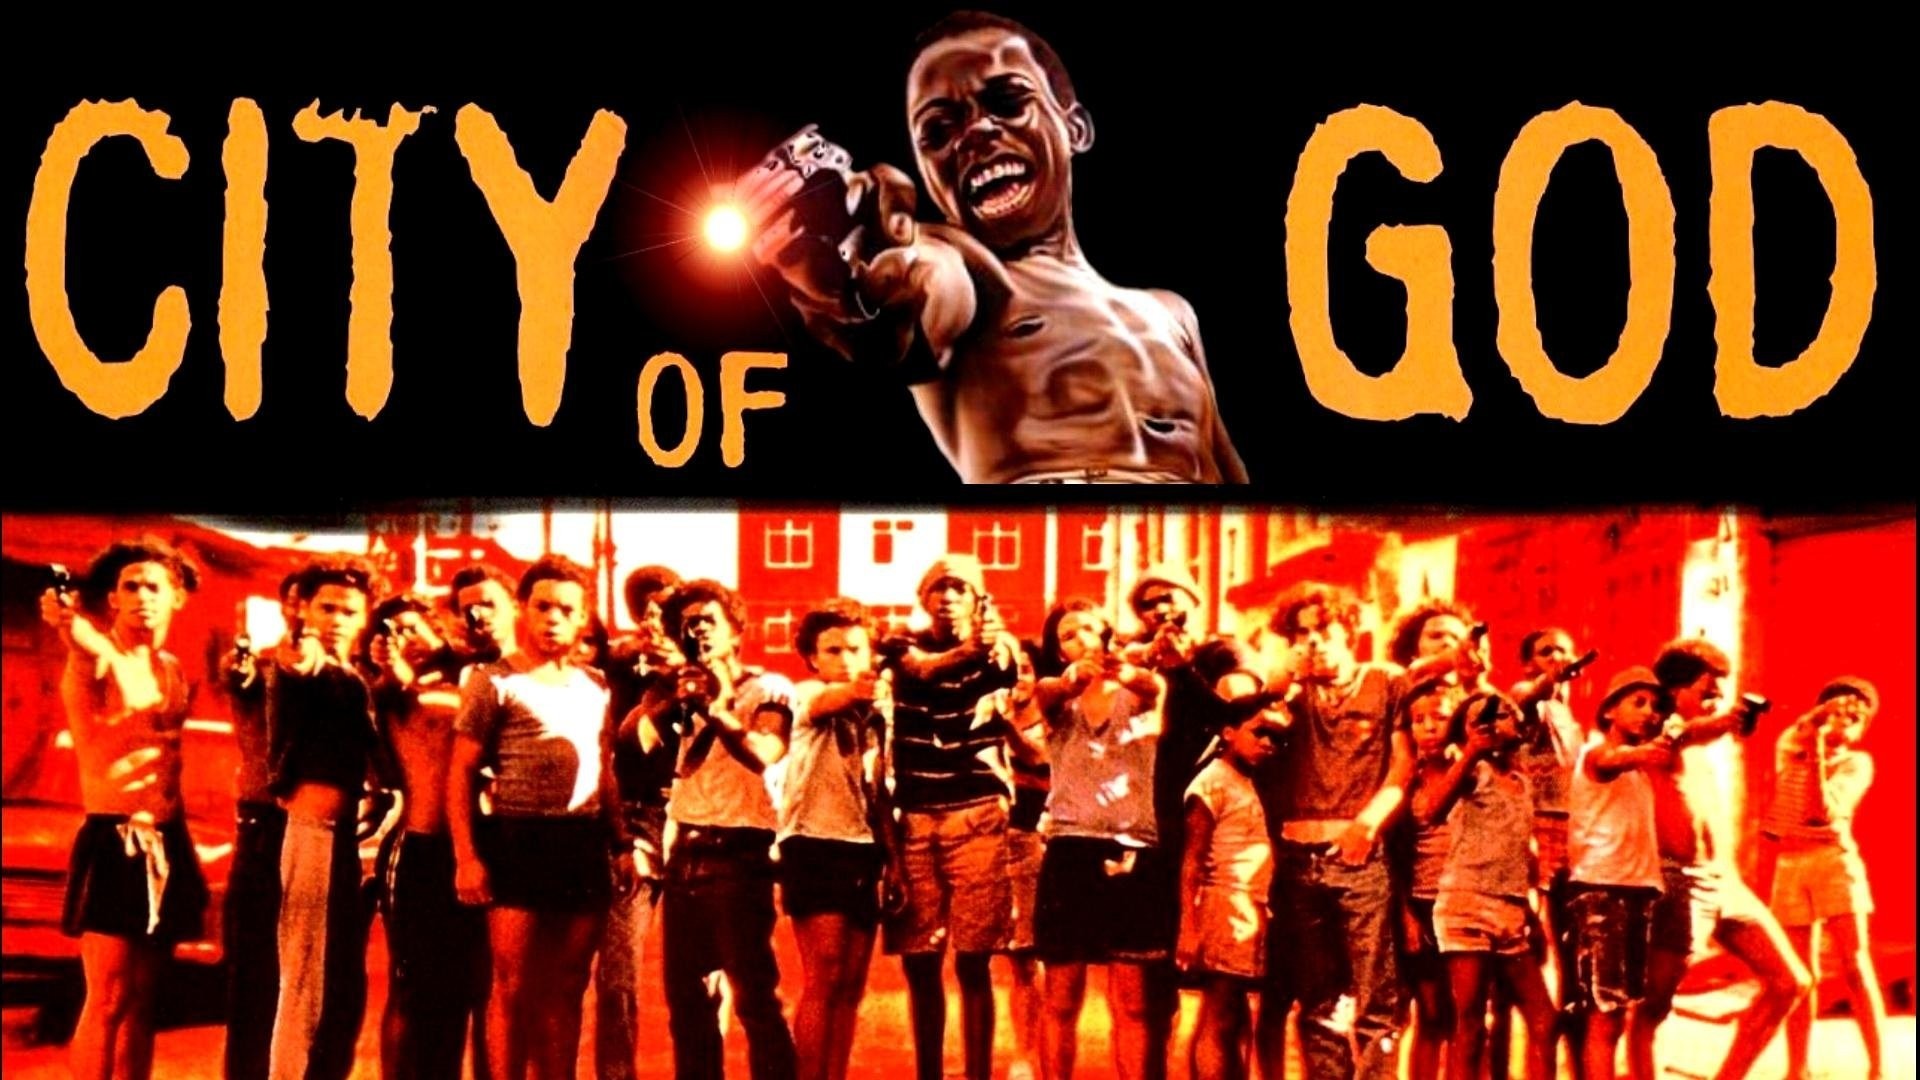 Nice Images Collection: City Of God Desktop Wallpapers